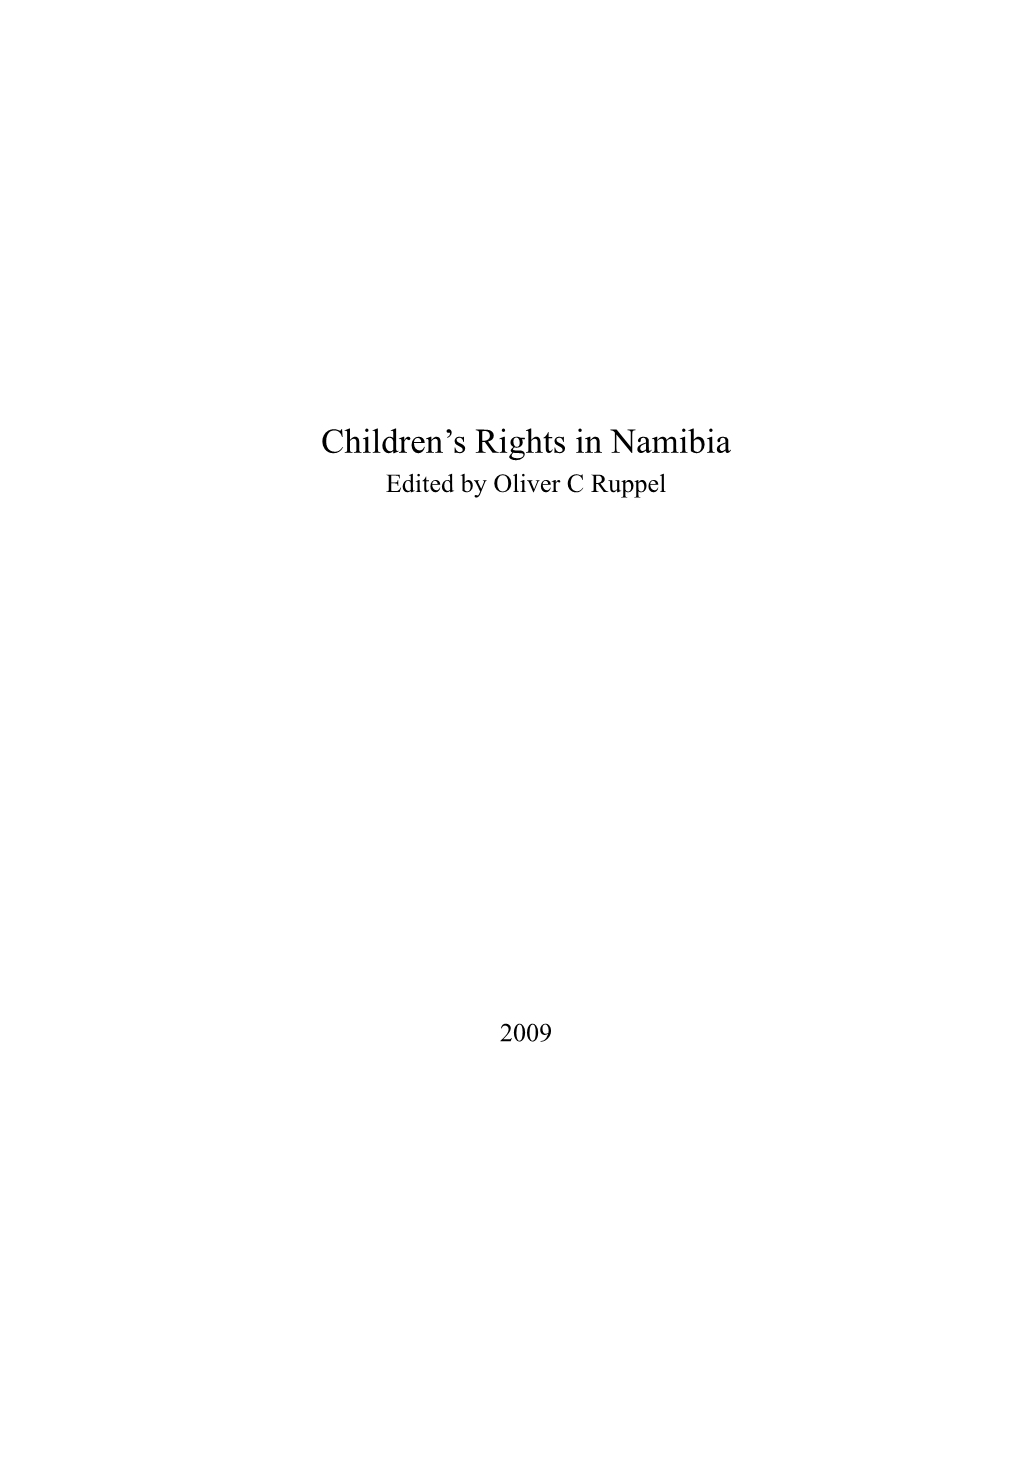 Children's Rights in Namibia